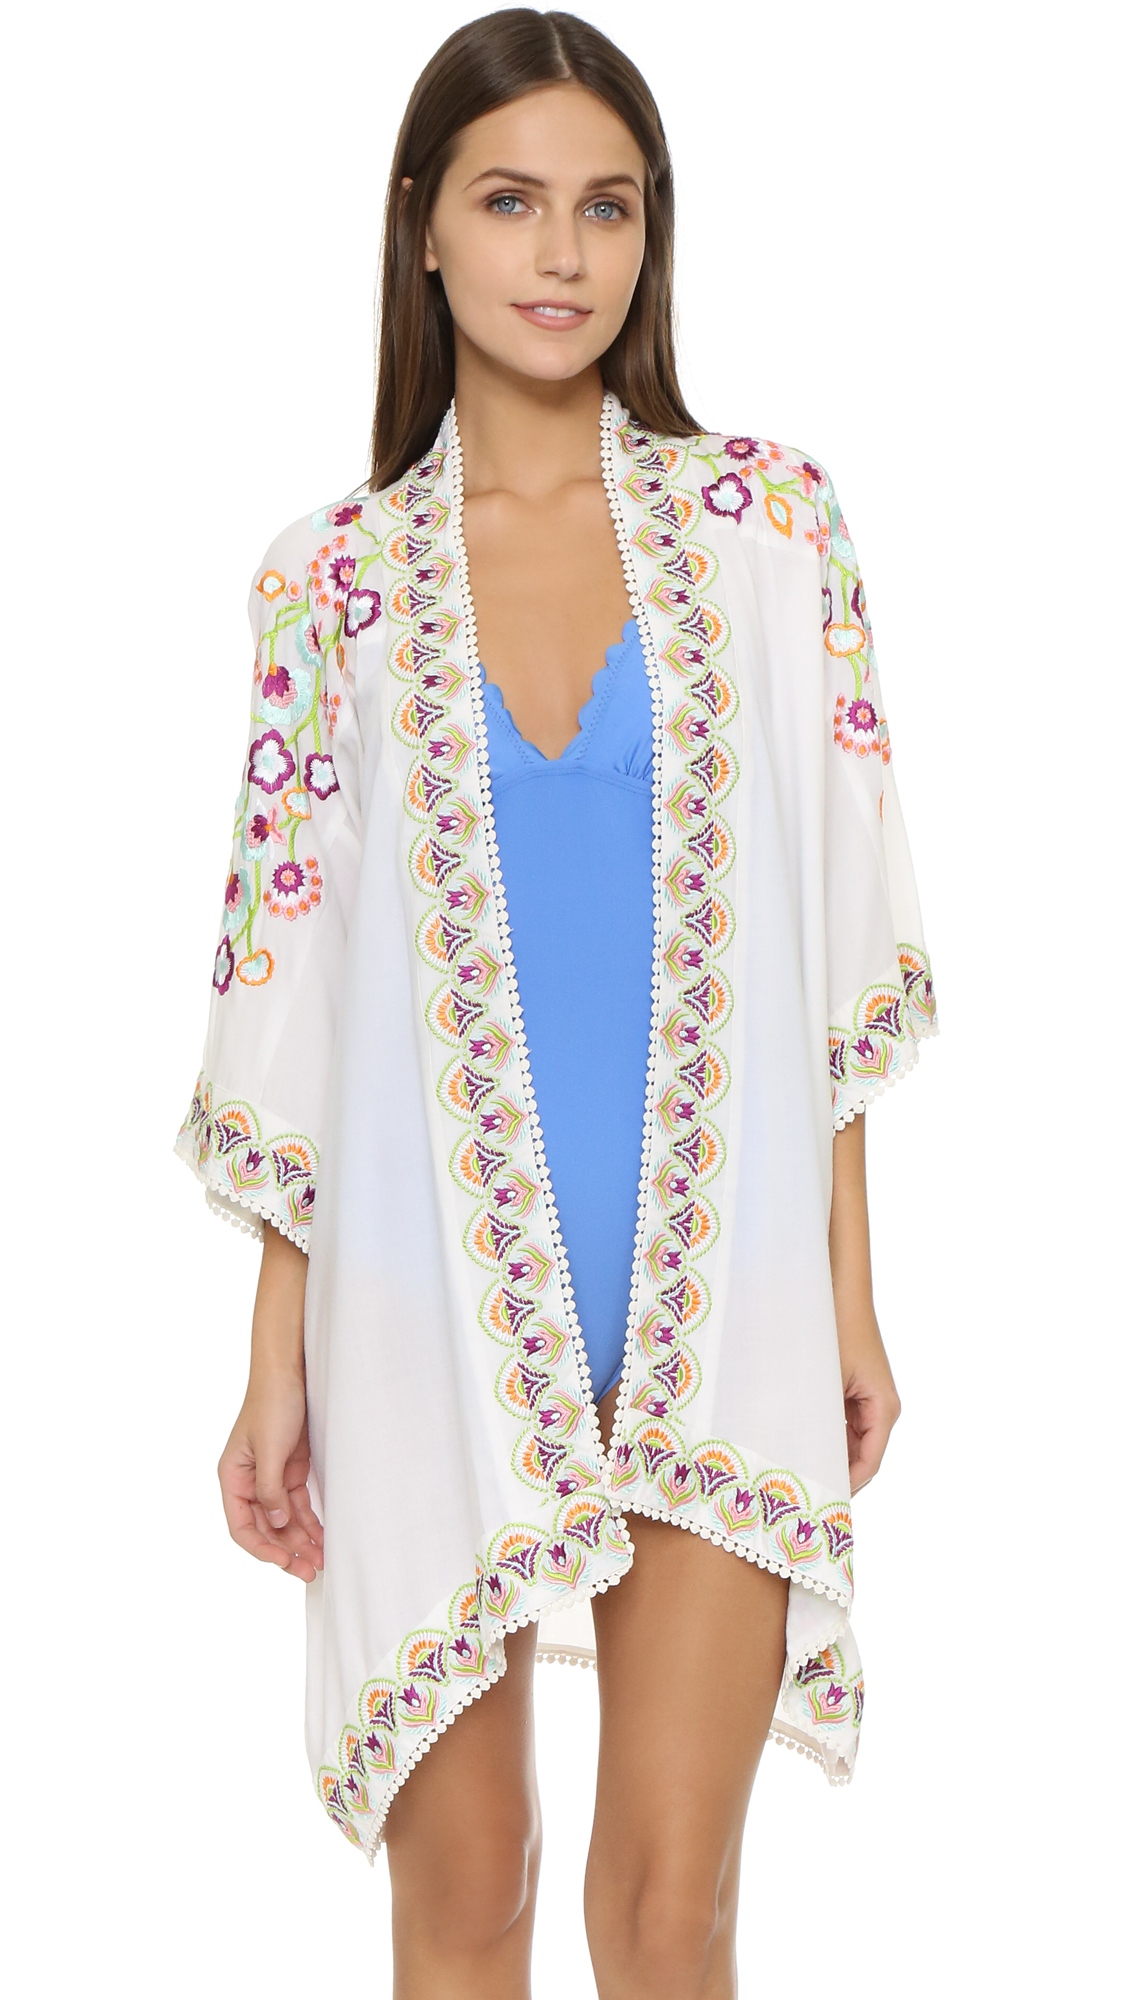 Lyst - Ondademar Cactus Beach Cover Up in White